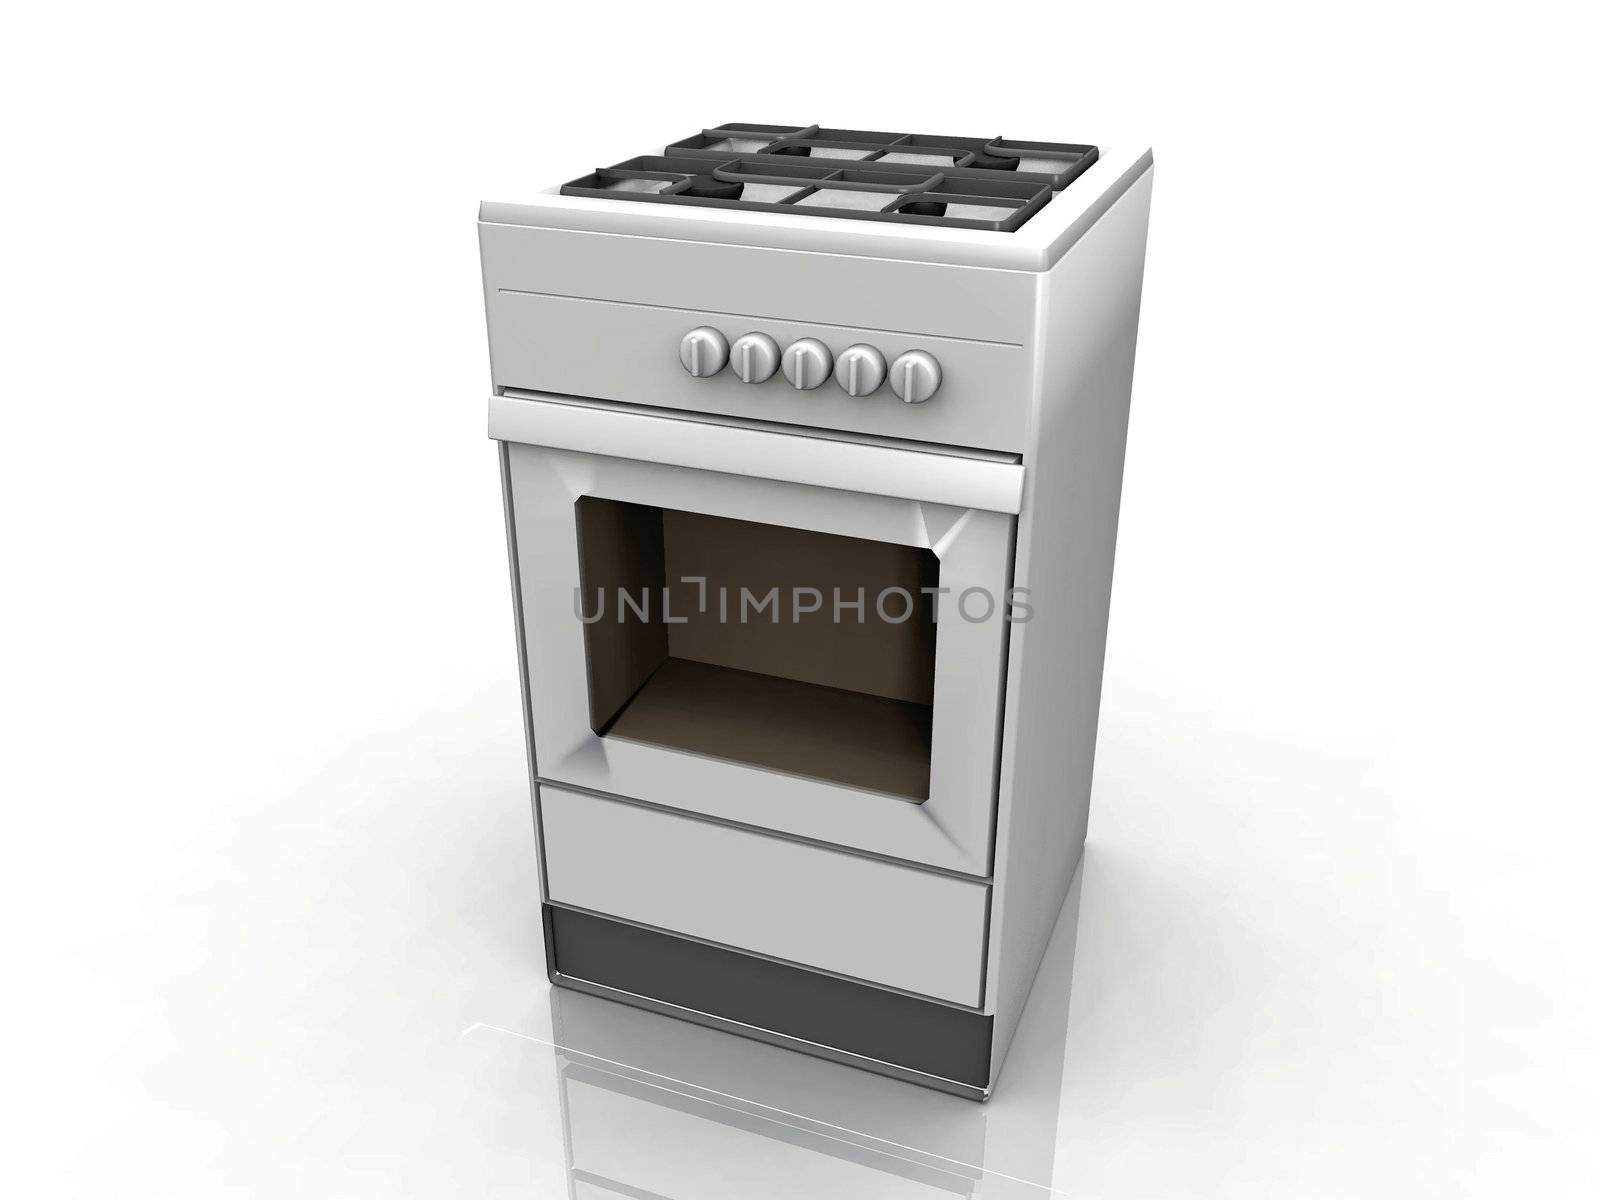 the stove on a white background